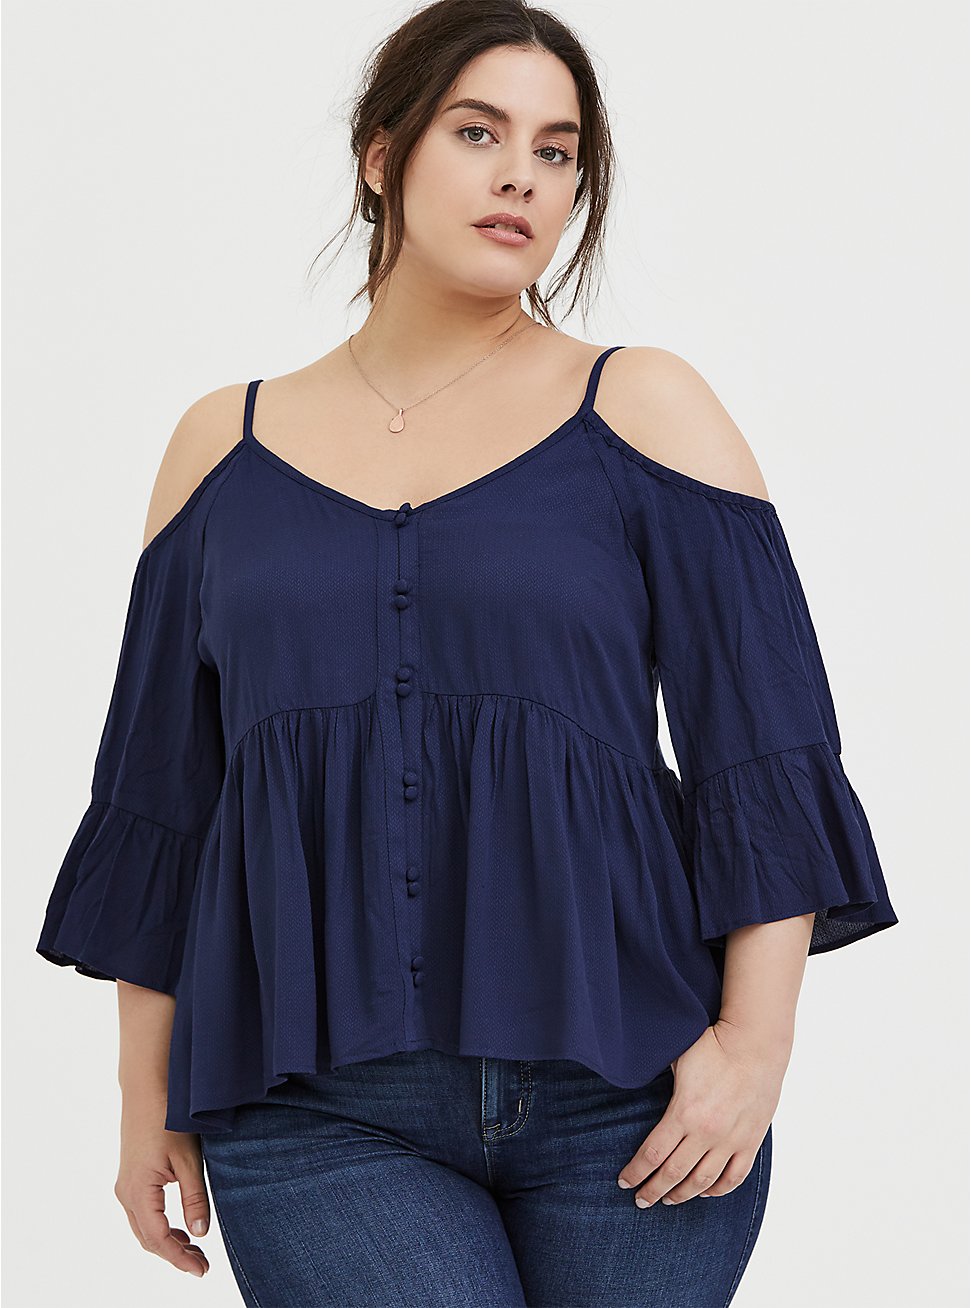 Plus Size - Navy Textured Rayon Cold Shoulder Babydoll Top - Torrid